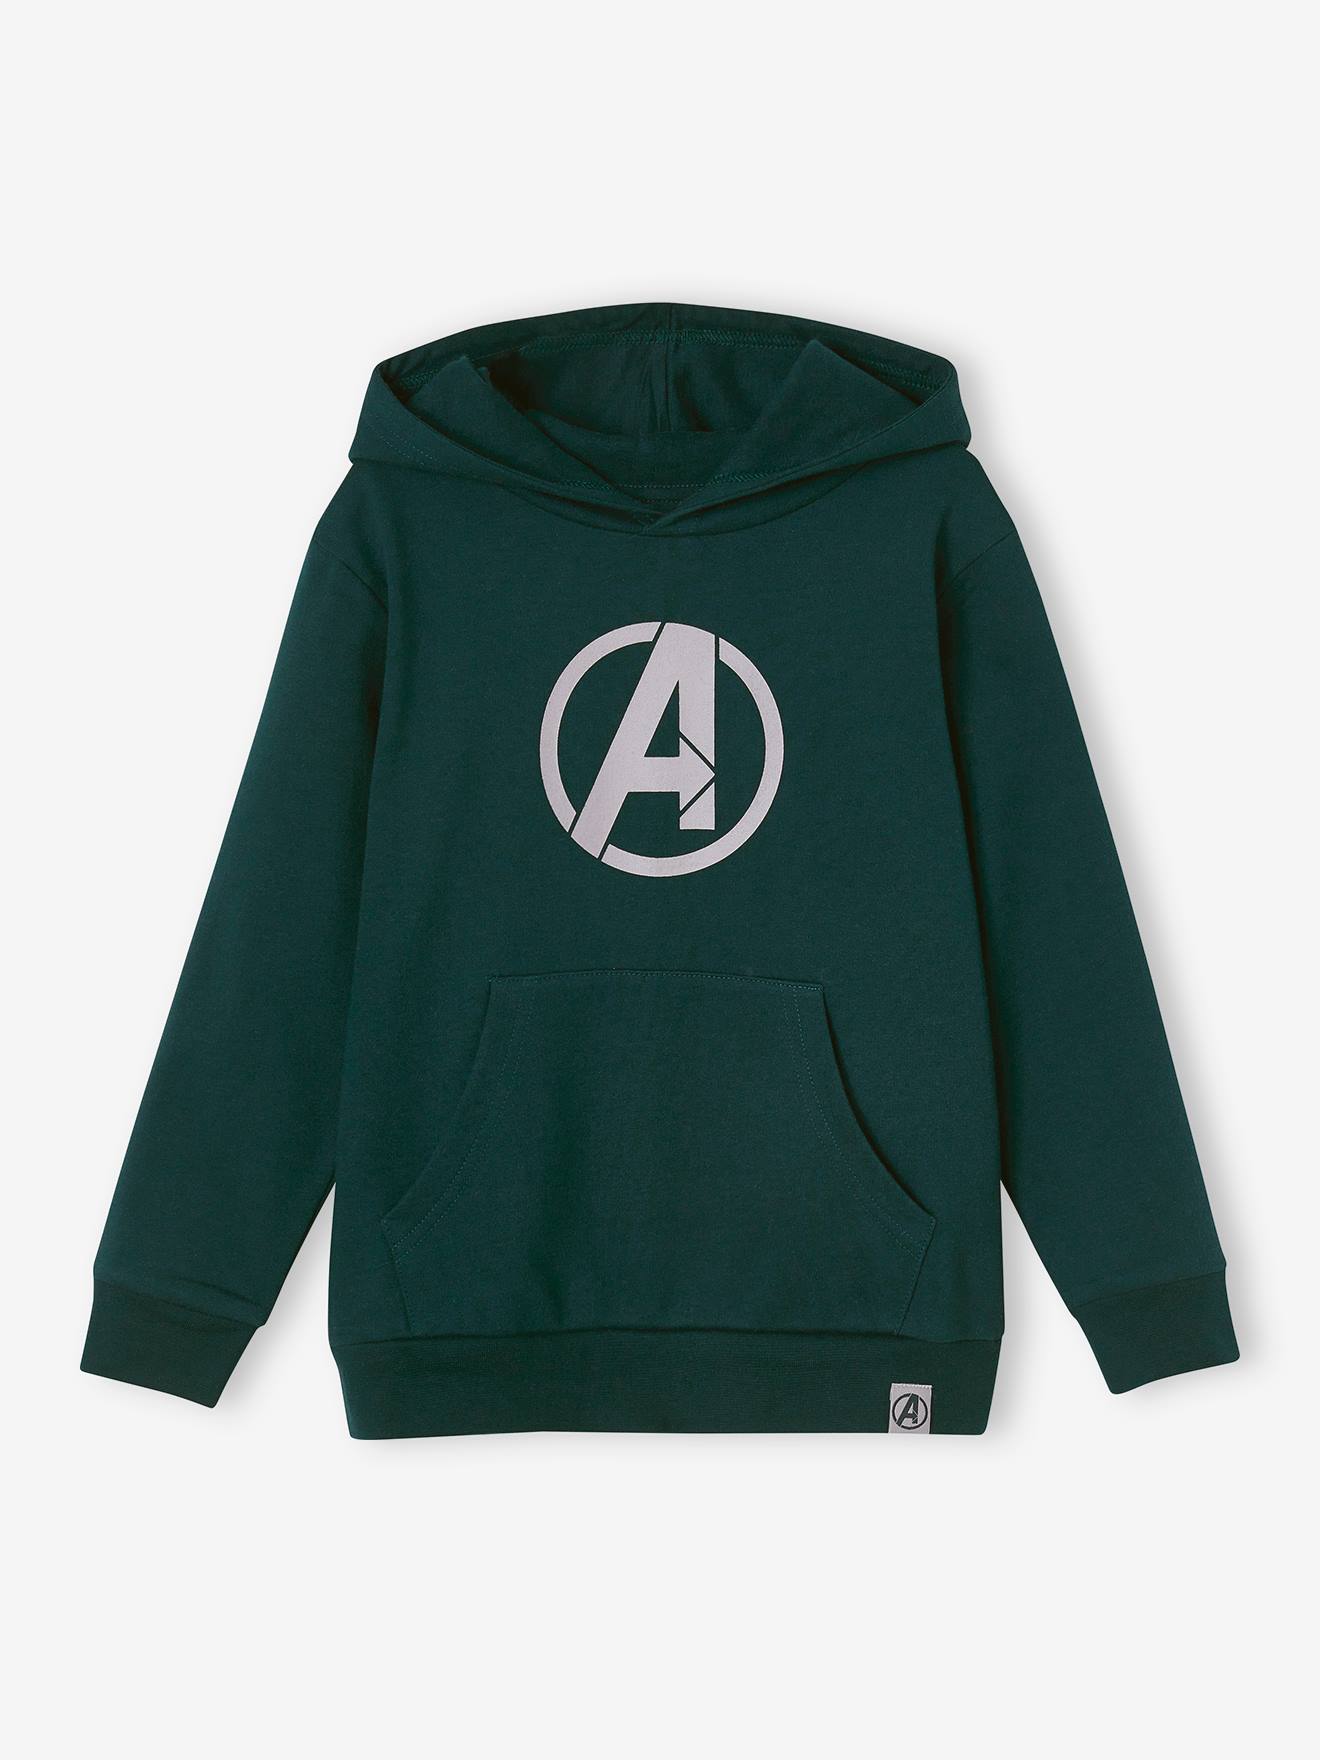 Hoodie for Boys, the Avengers by Marvel(r) fir green